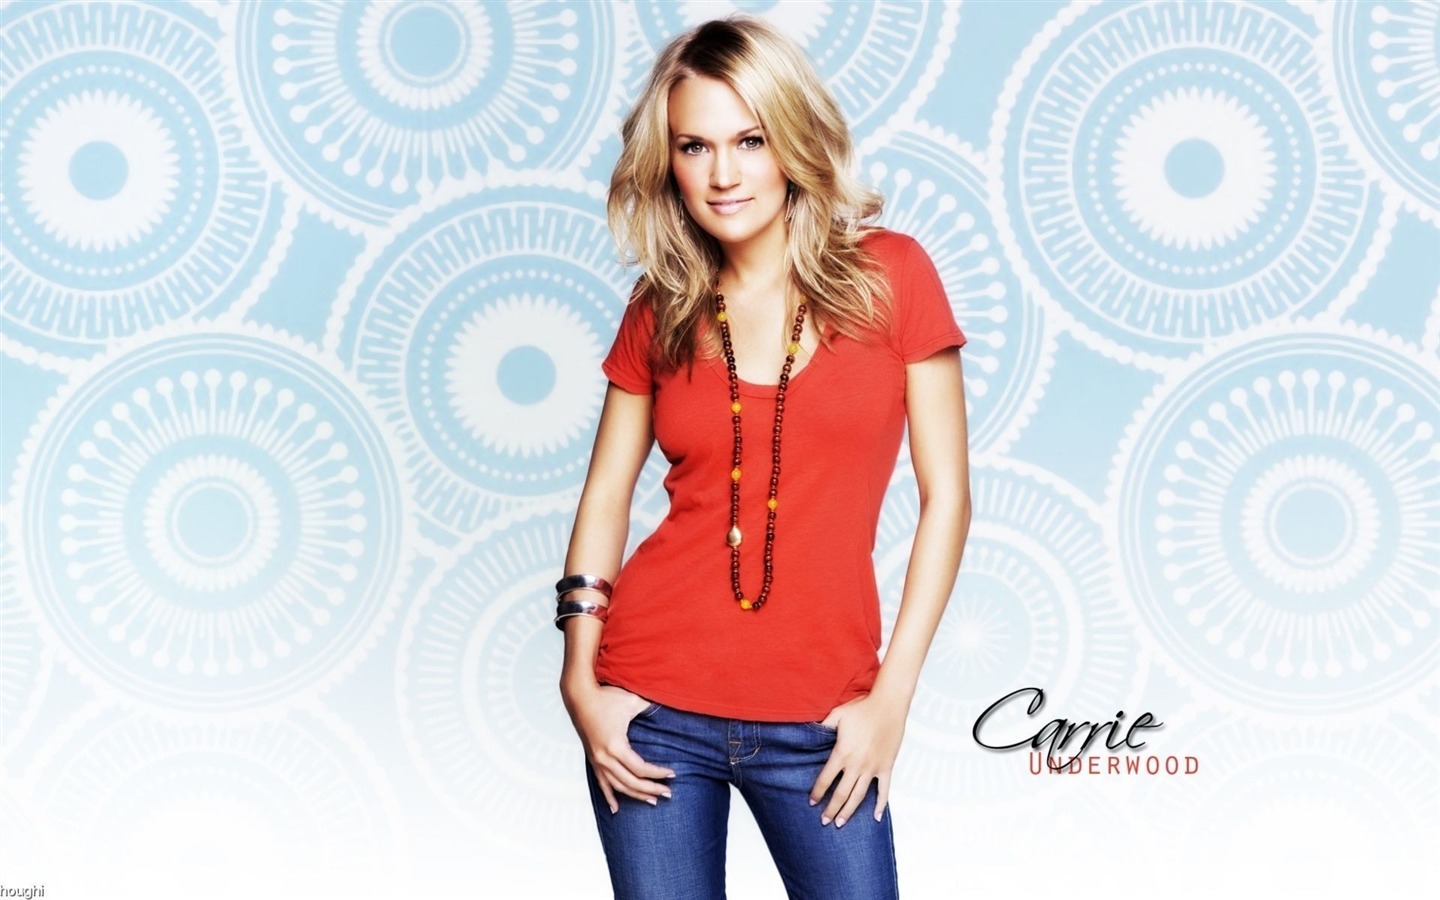 Carrie Underwood #006 - 1440x900 Wallpapers Pictures Photos Images